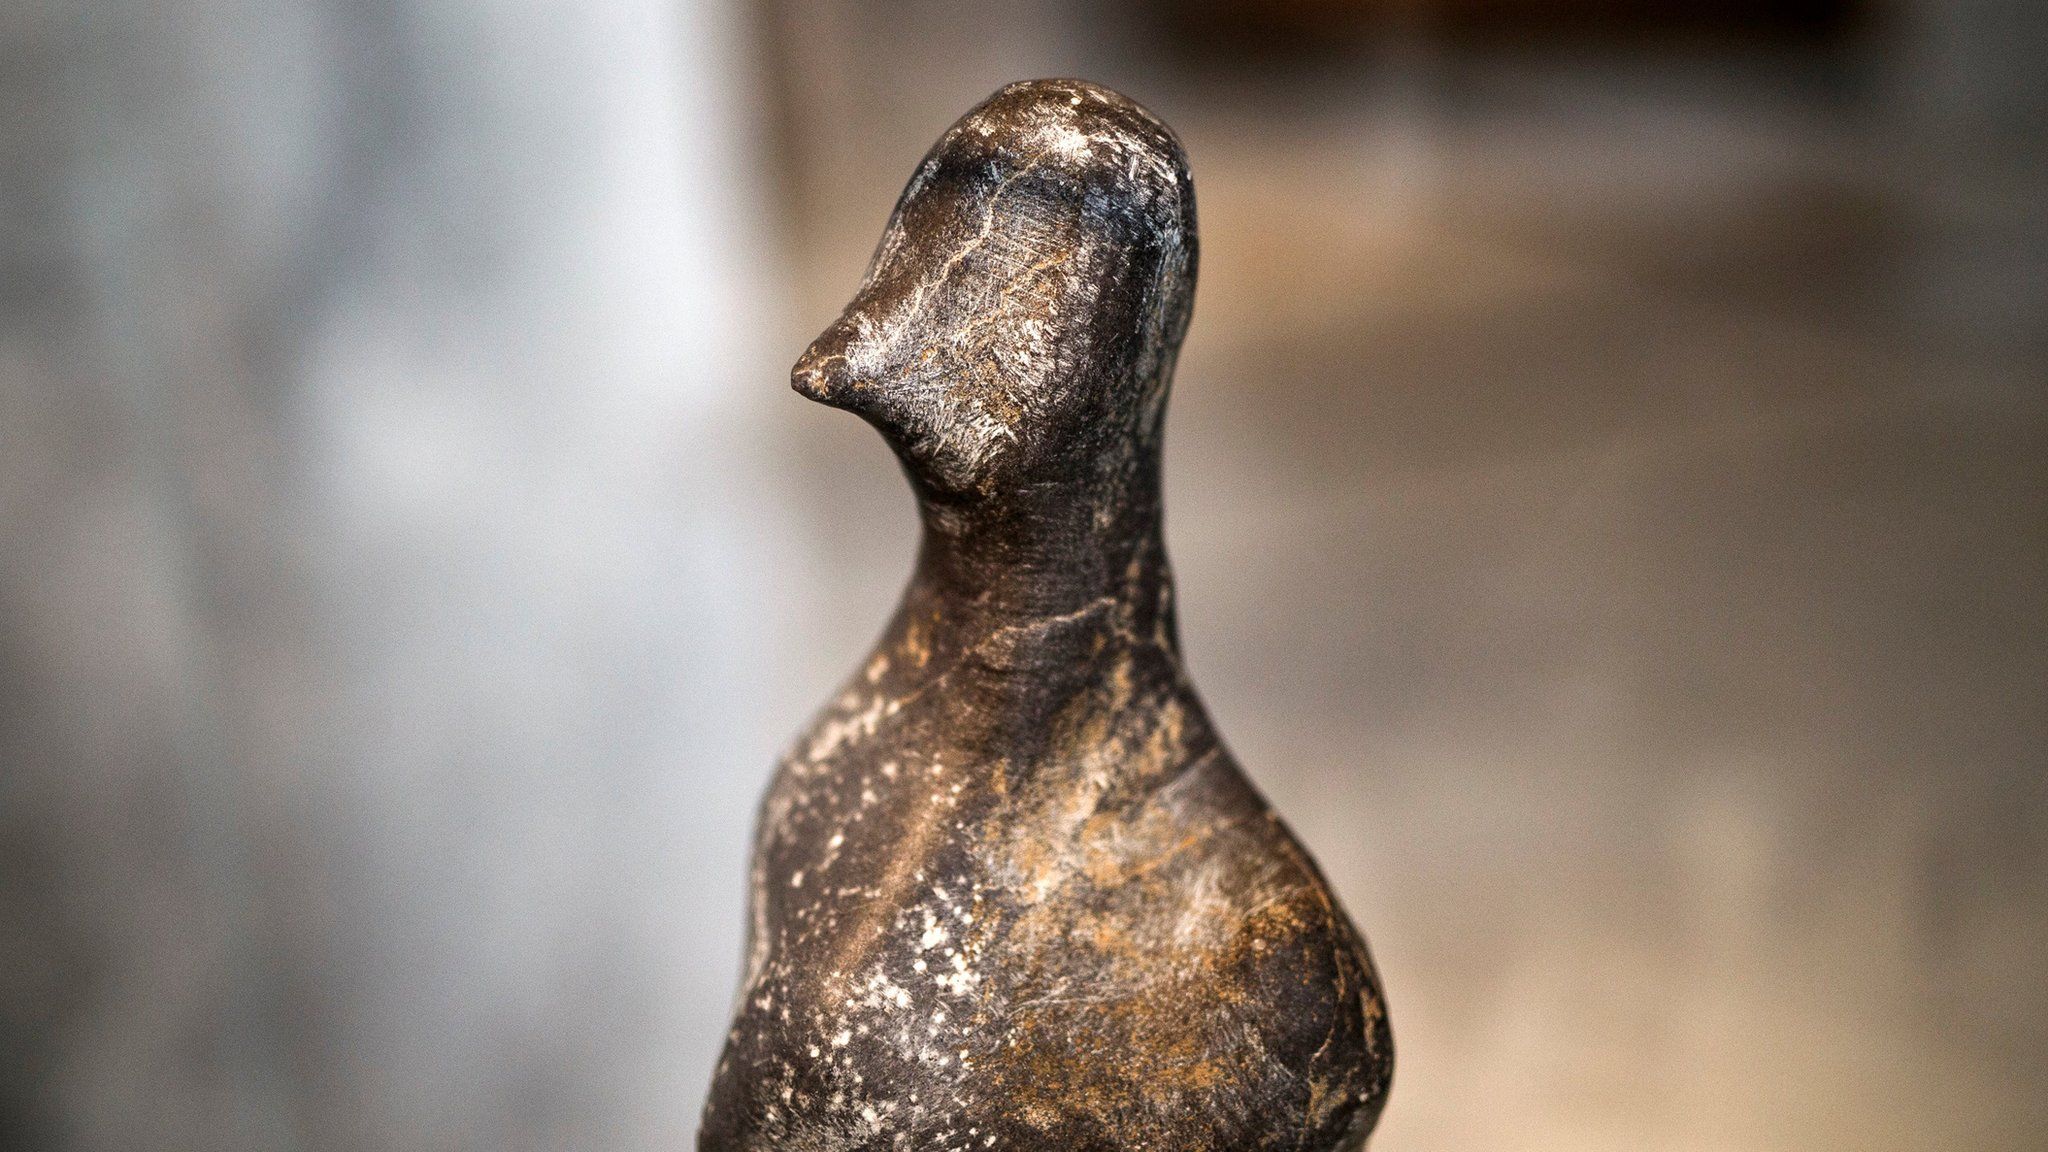 A 7,000-year-old Neolithic statuette on temporary show at the National Archaeological Museum in Athens, Greece, on 10 February 2017